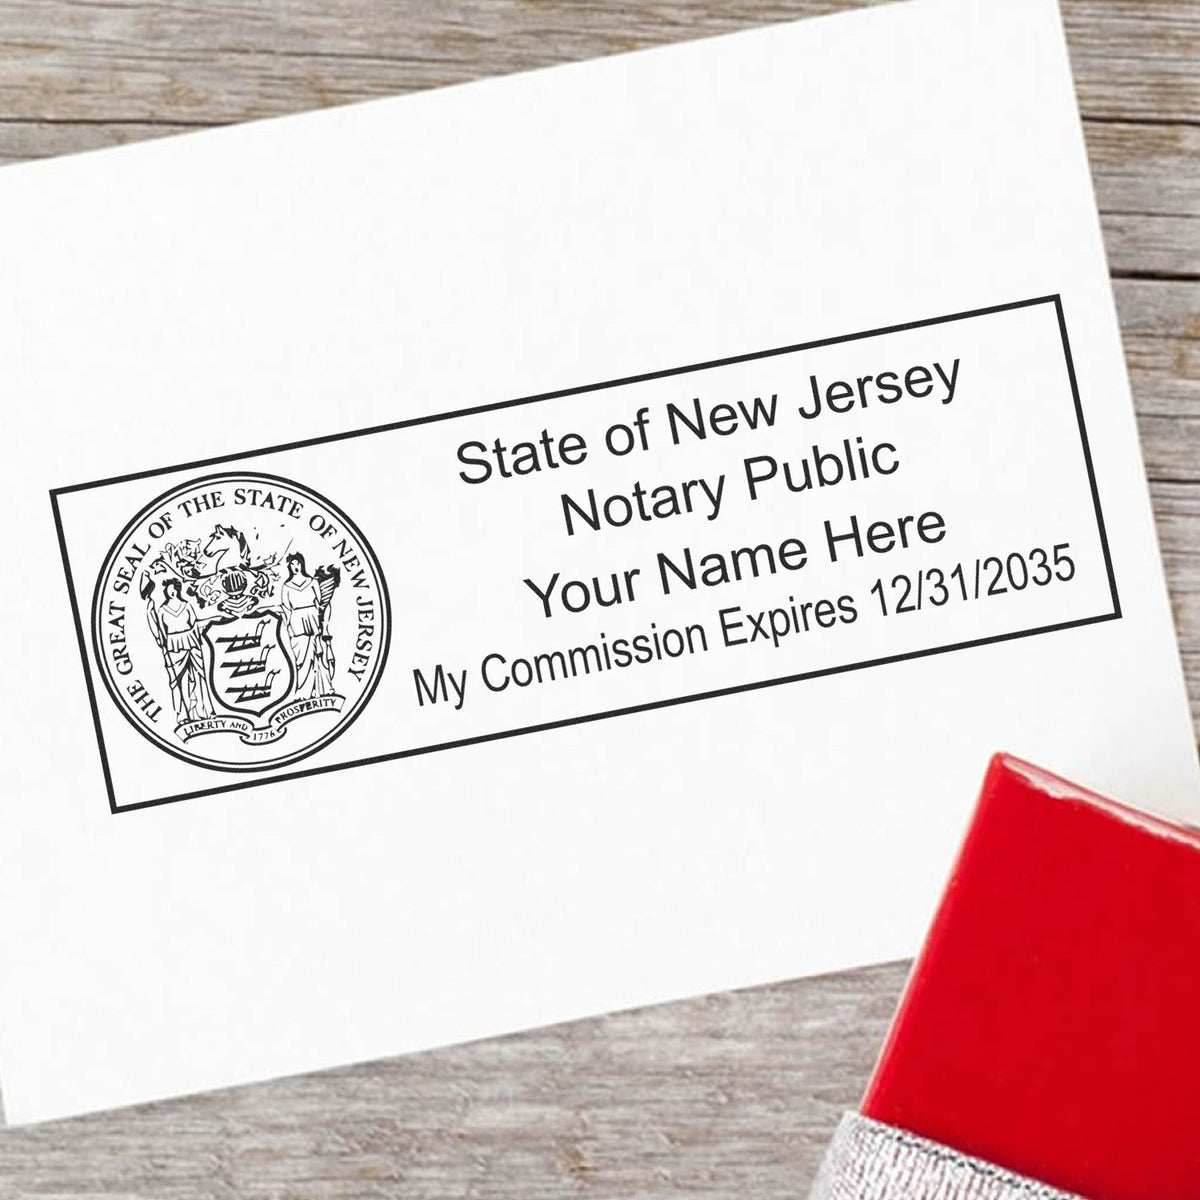 An alternative view of the PSI New Jersey Notary Stamp stamped on a sheet of paper showing the image in use